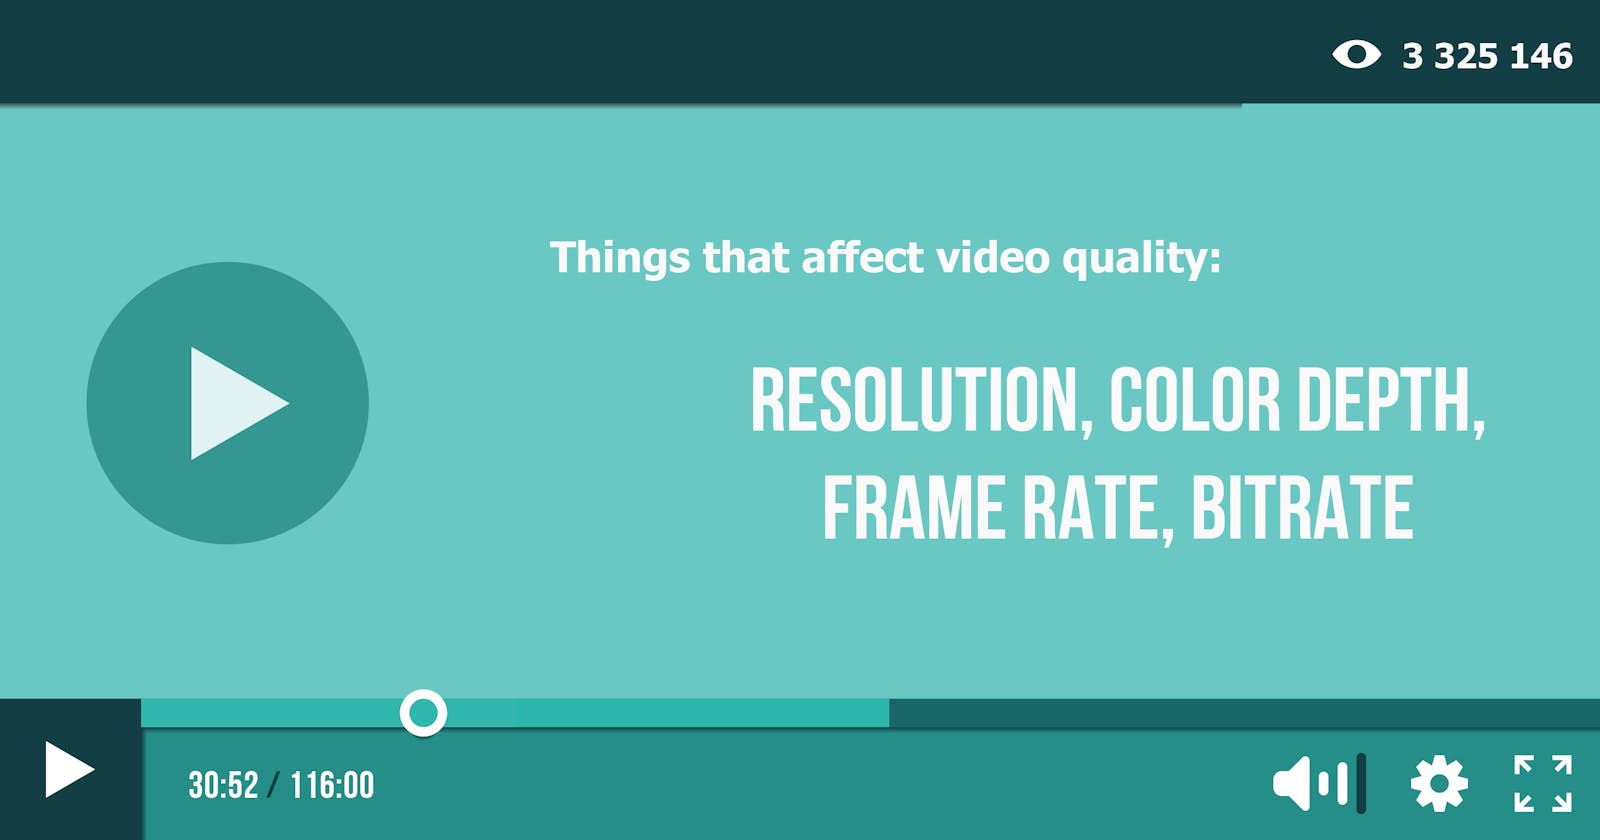 Things that affect video quality: Resolution, Color depth, Frame rate, Bitrate